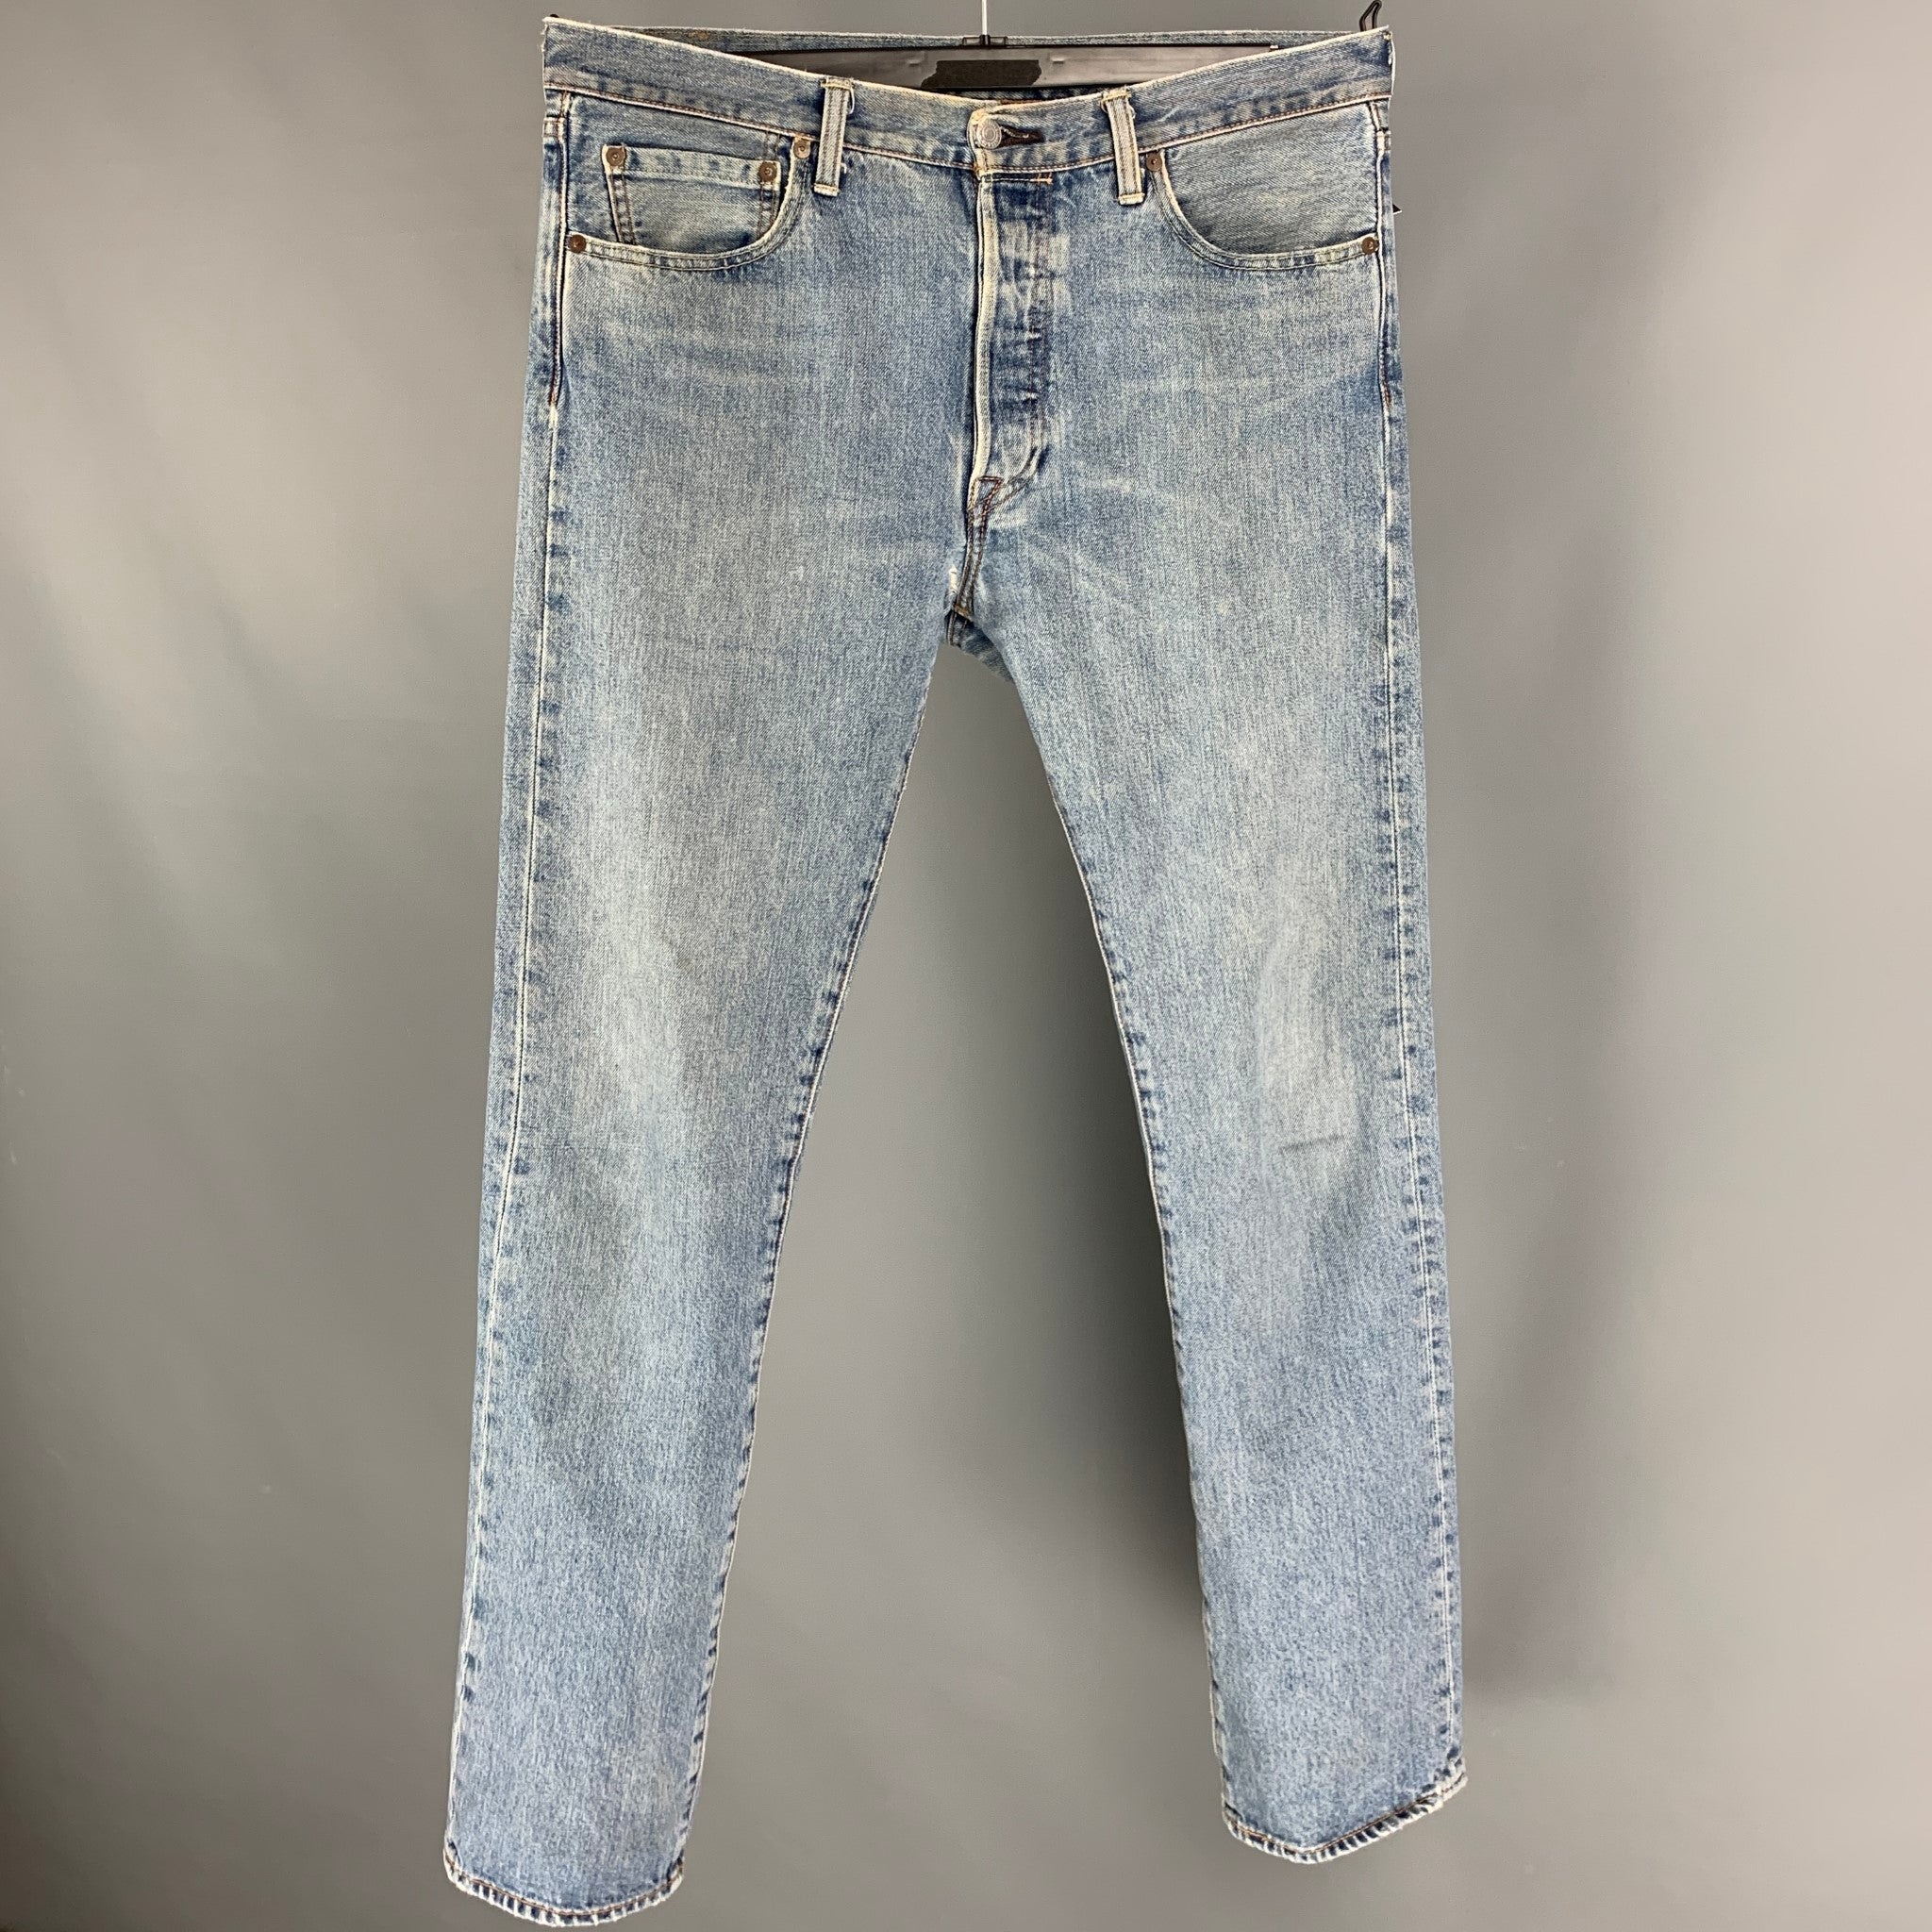 Anyone know the age of these Polo Ralph Lauren jeans? : r/Denim